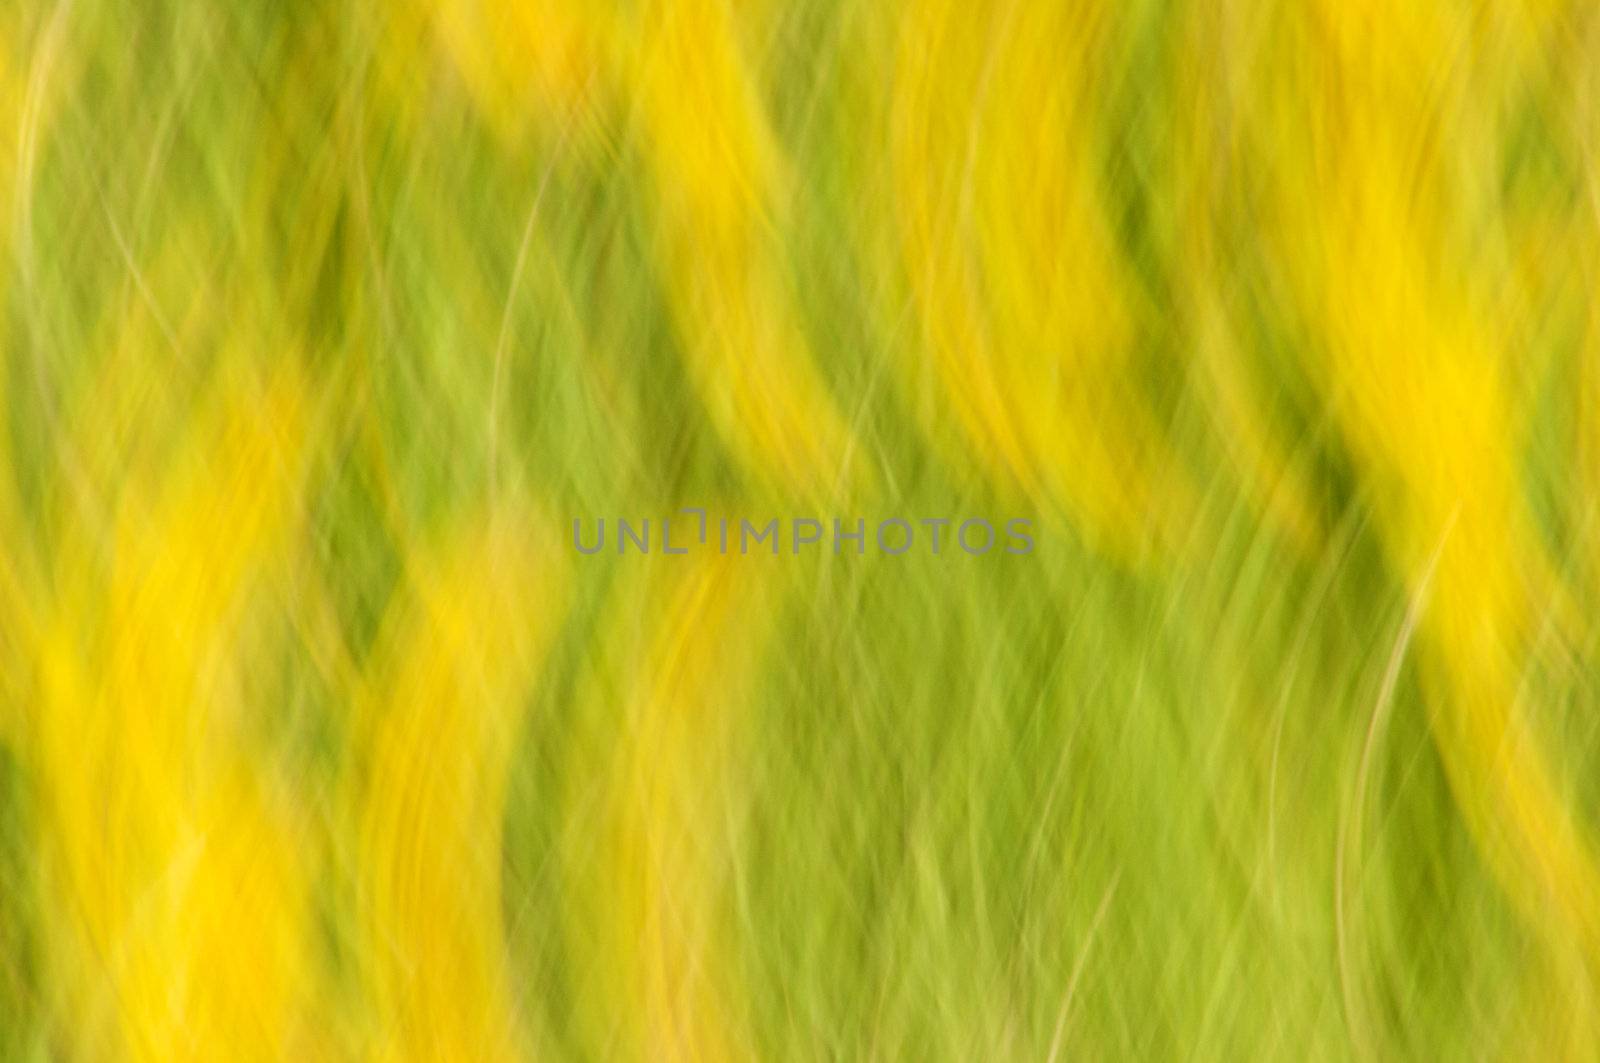 A green and yellow motion blur abstract texture by Talanis